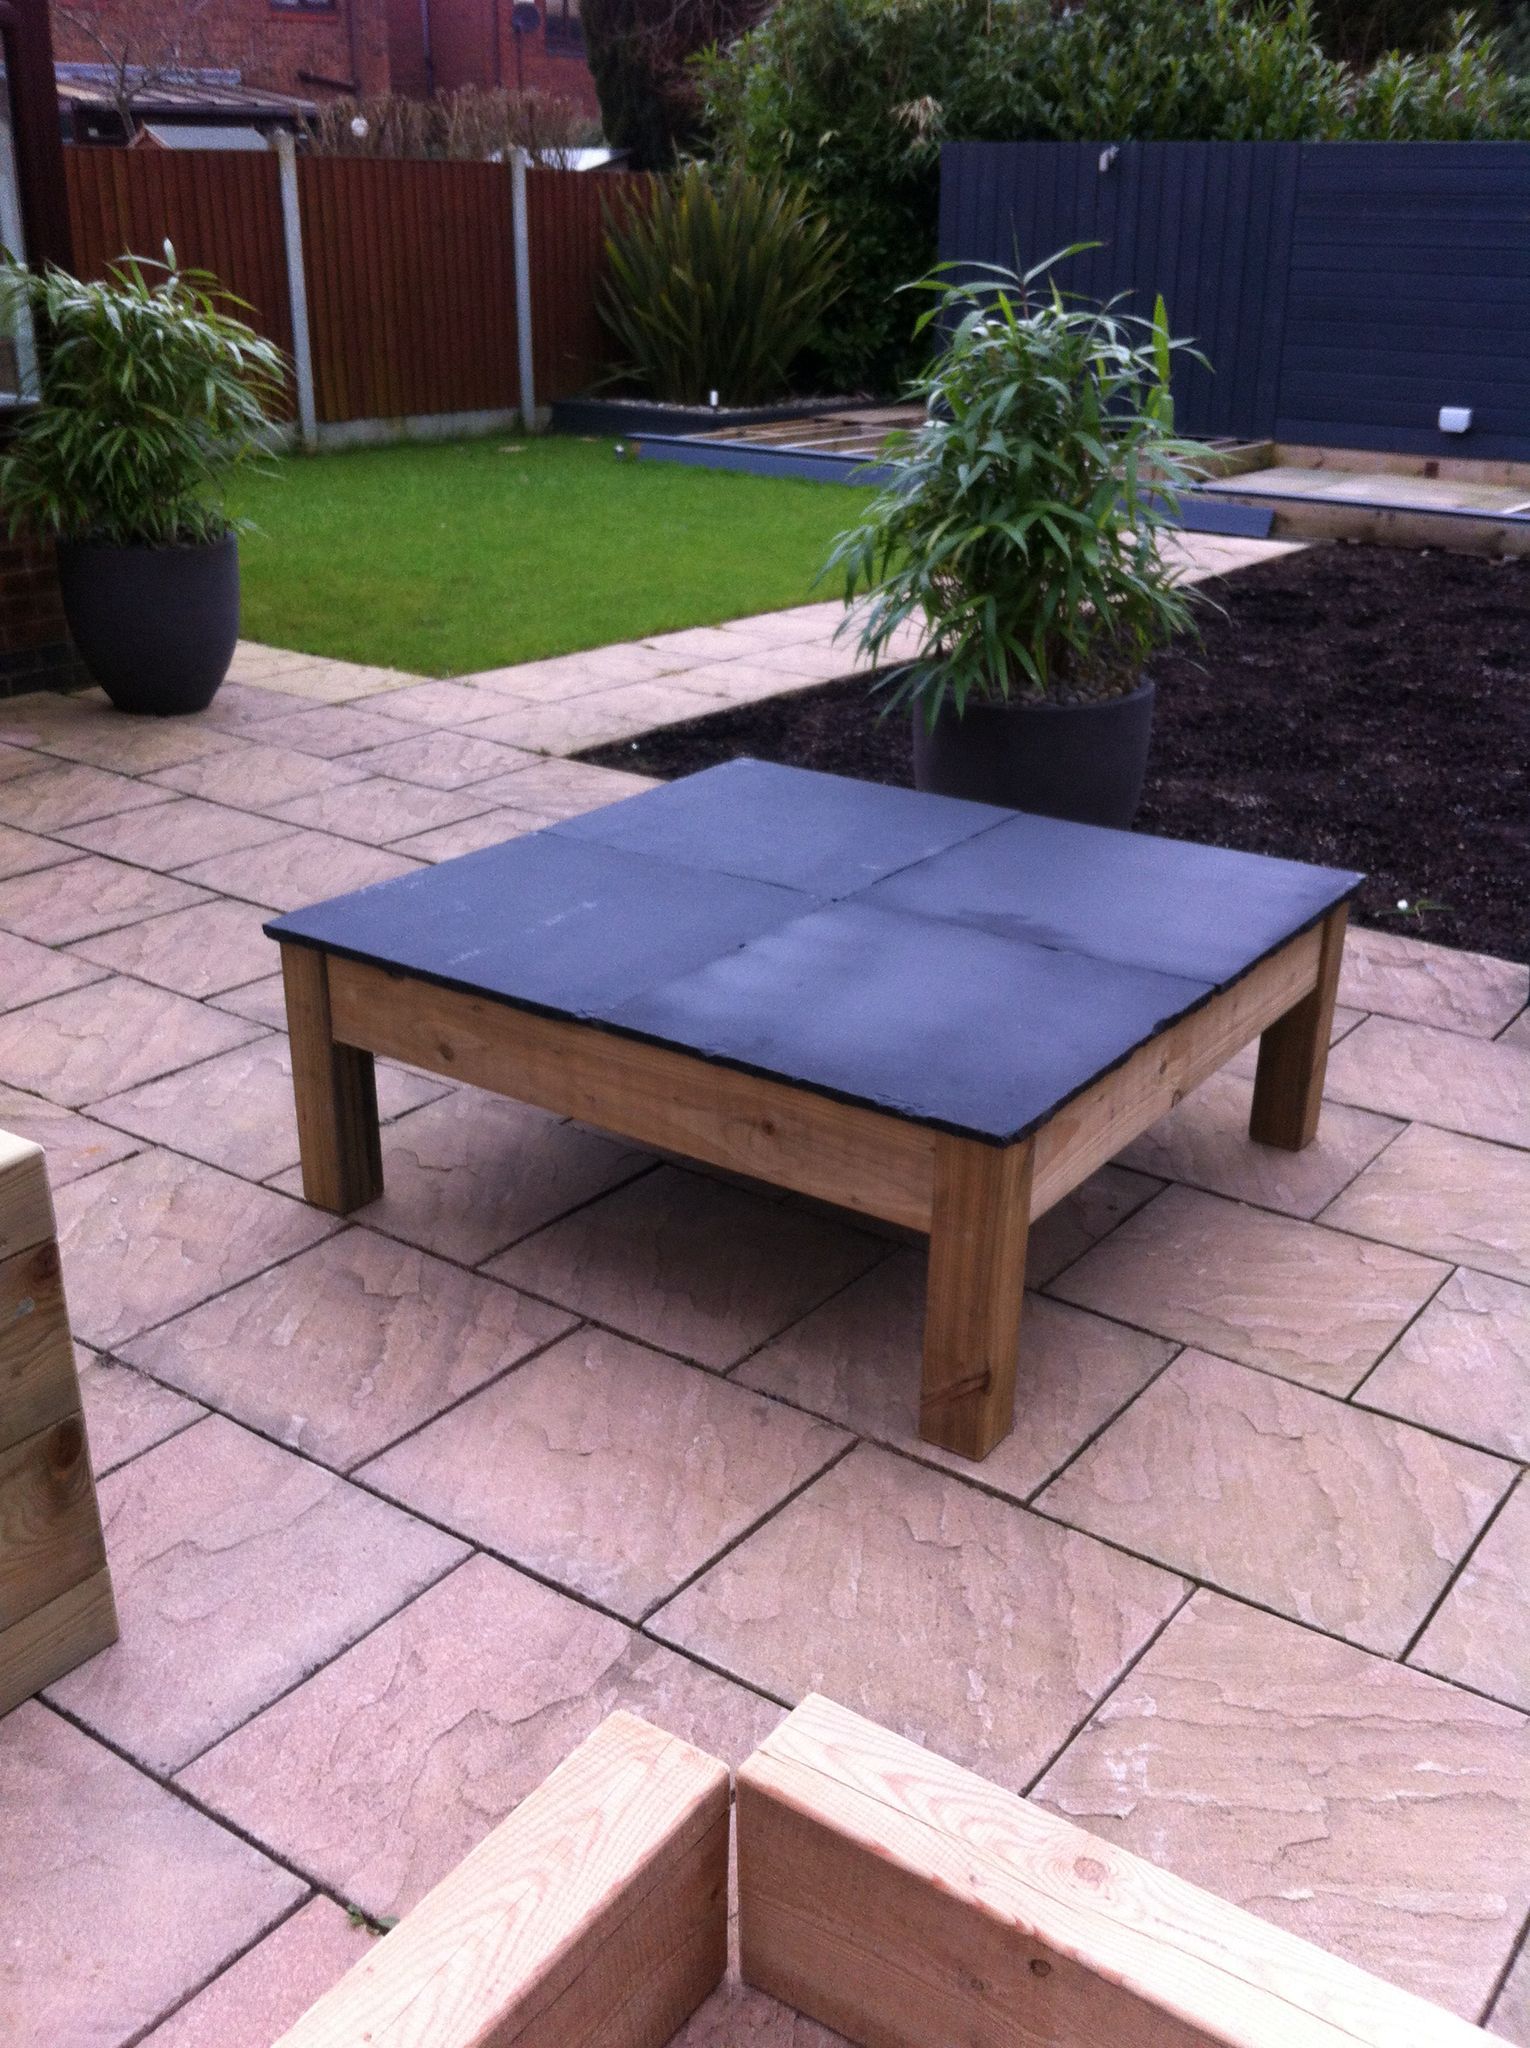 Diy Contemporary Outdoor Coffee Table ,with Limestone Paving Slabs As With Regard To Waterproof Coffee Tables (View 16 of 21)